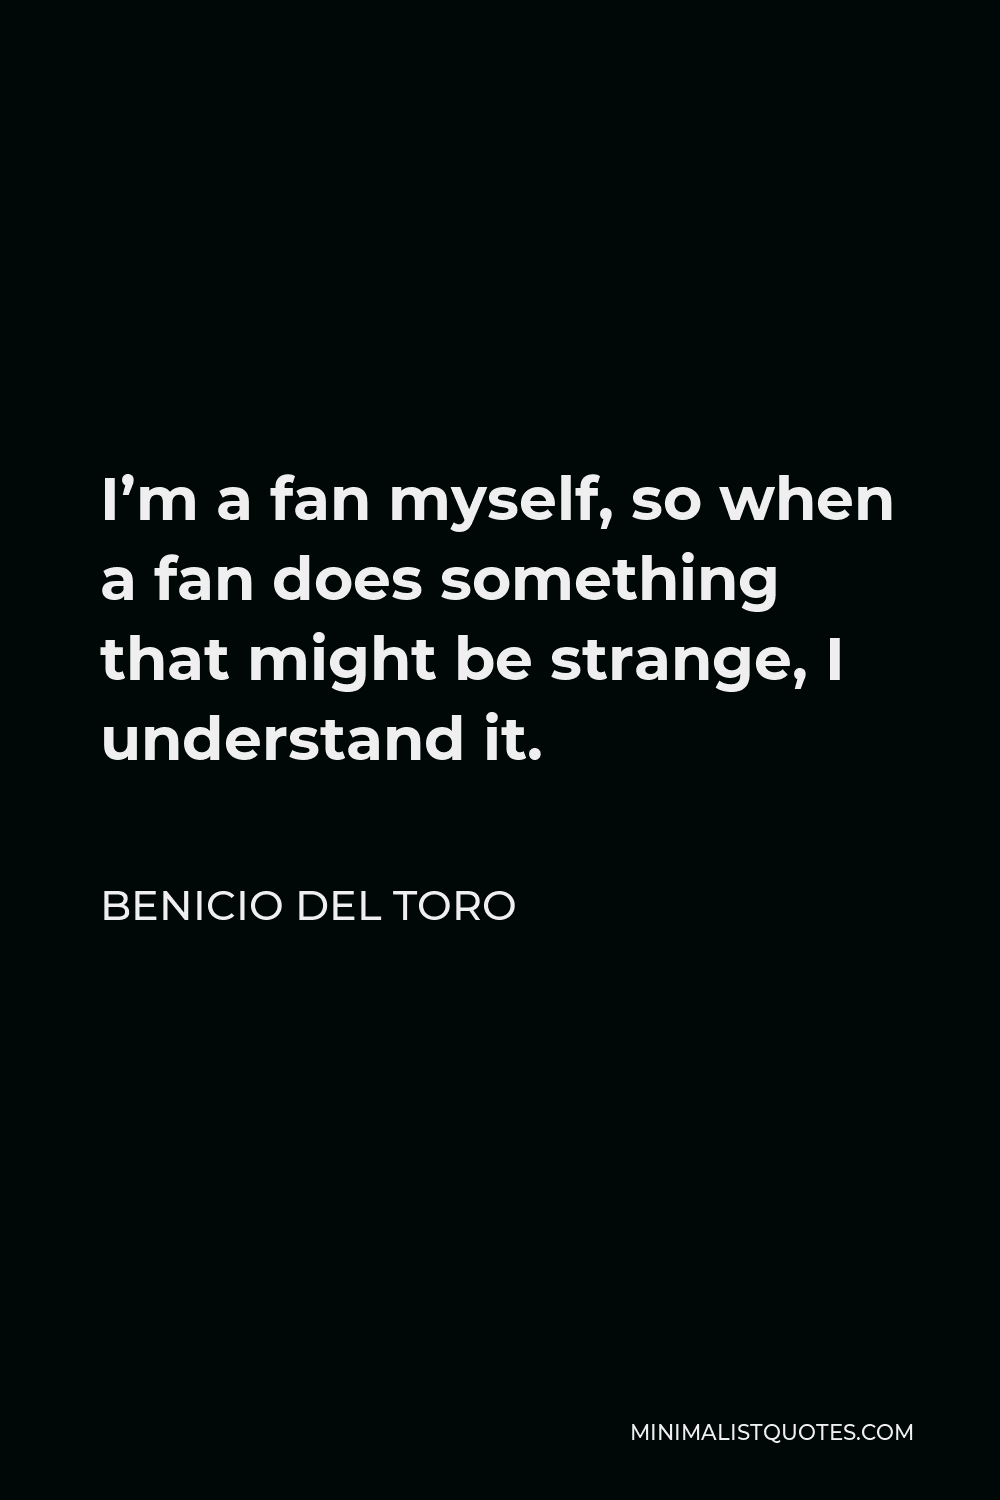 Benicio Del Toro Quote - I’m a fan myself, so when a fan does something that might be strange, I understand it.